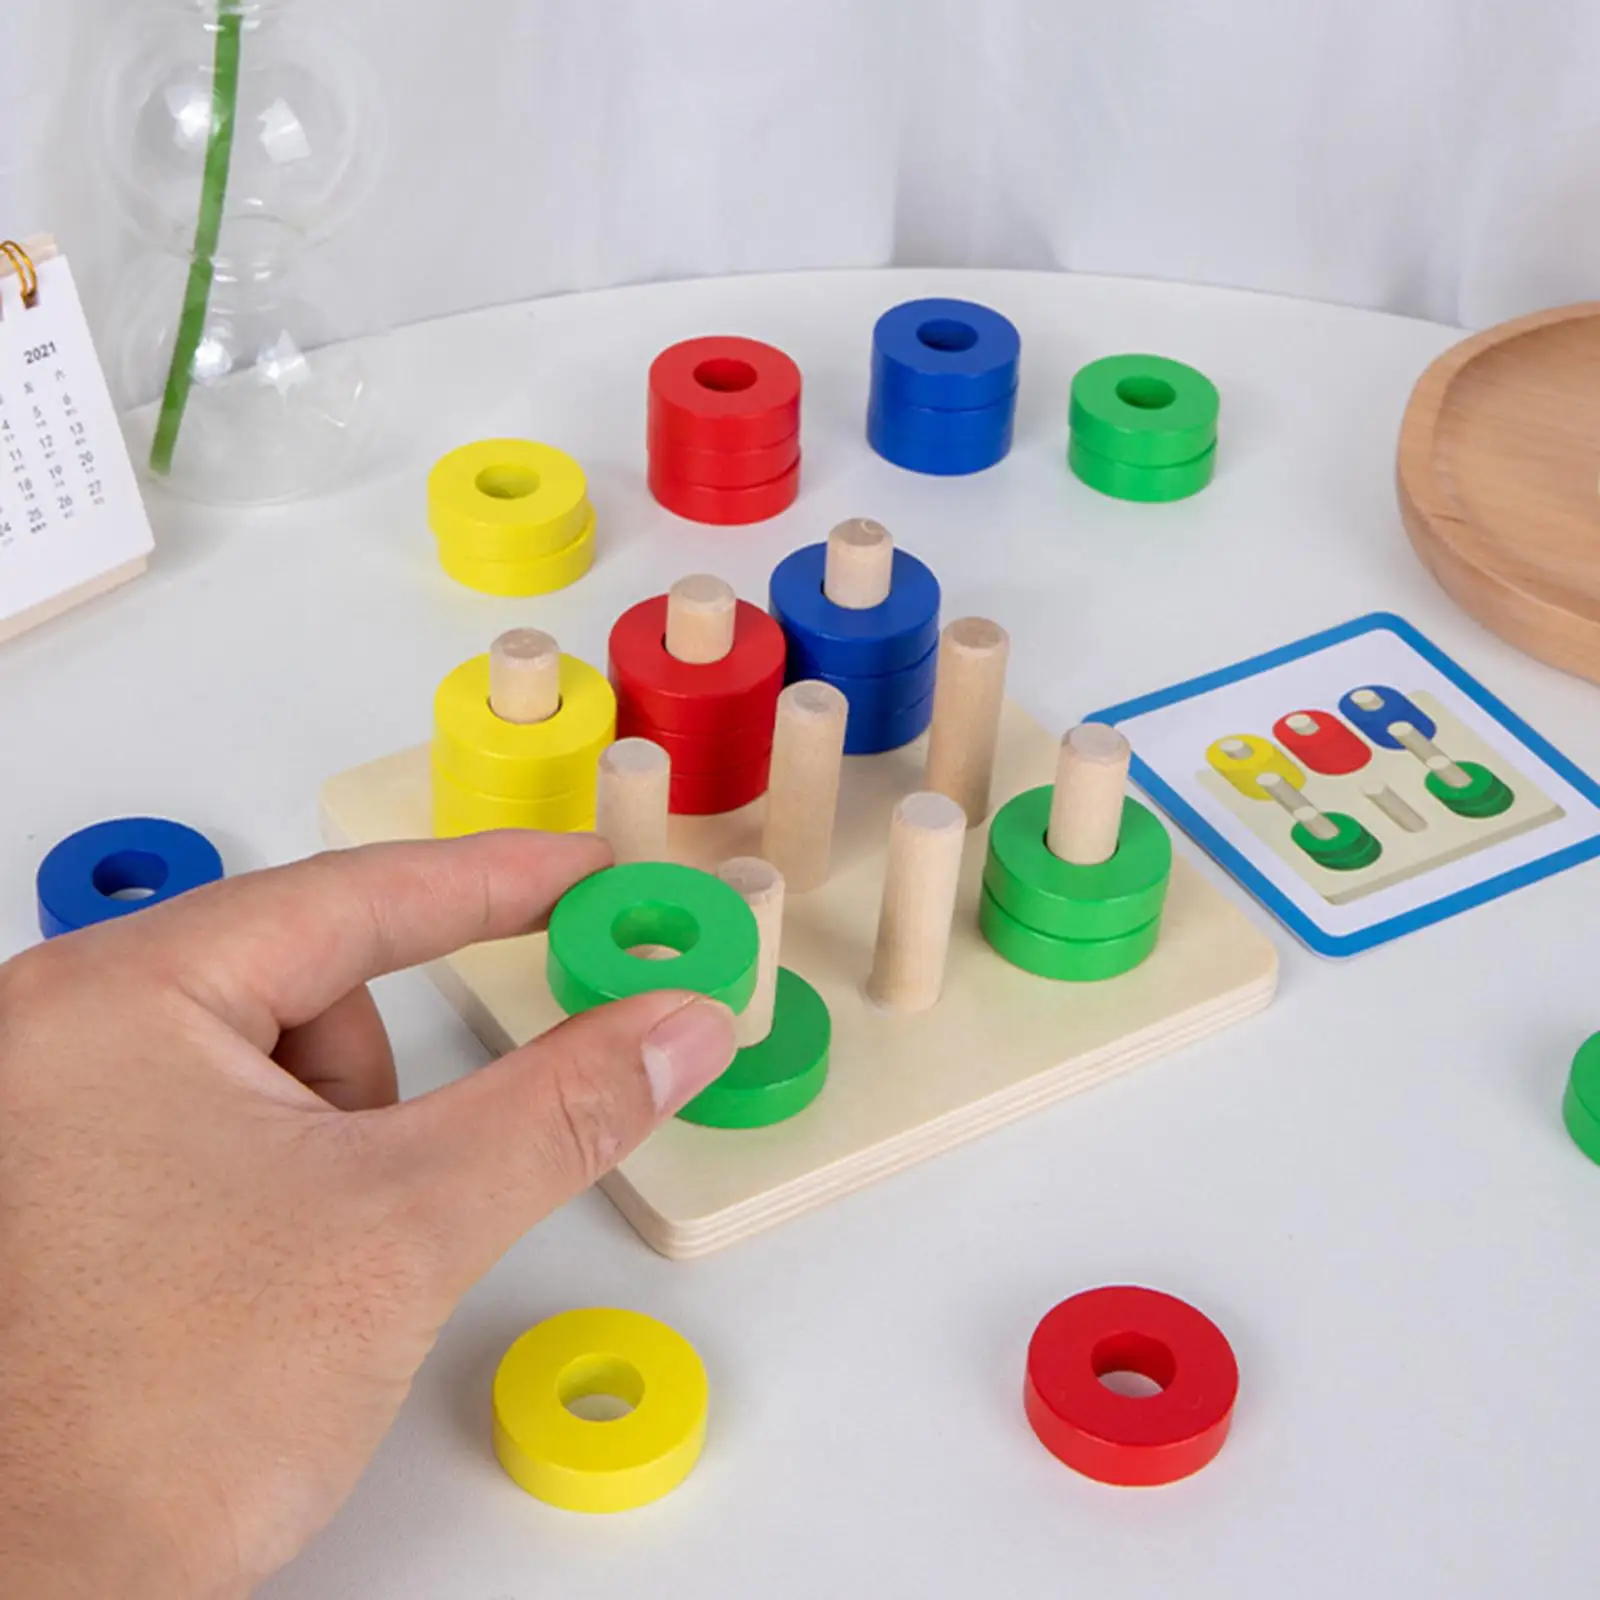 Wooden Geometric Stacker Toys Early Education Toys Puzzle Sorting Toys Board Game Stacking Nesting Blocks for Ages 3+  Toddlers